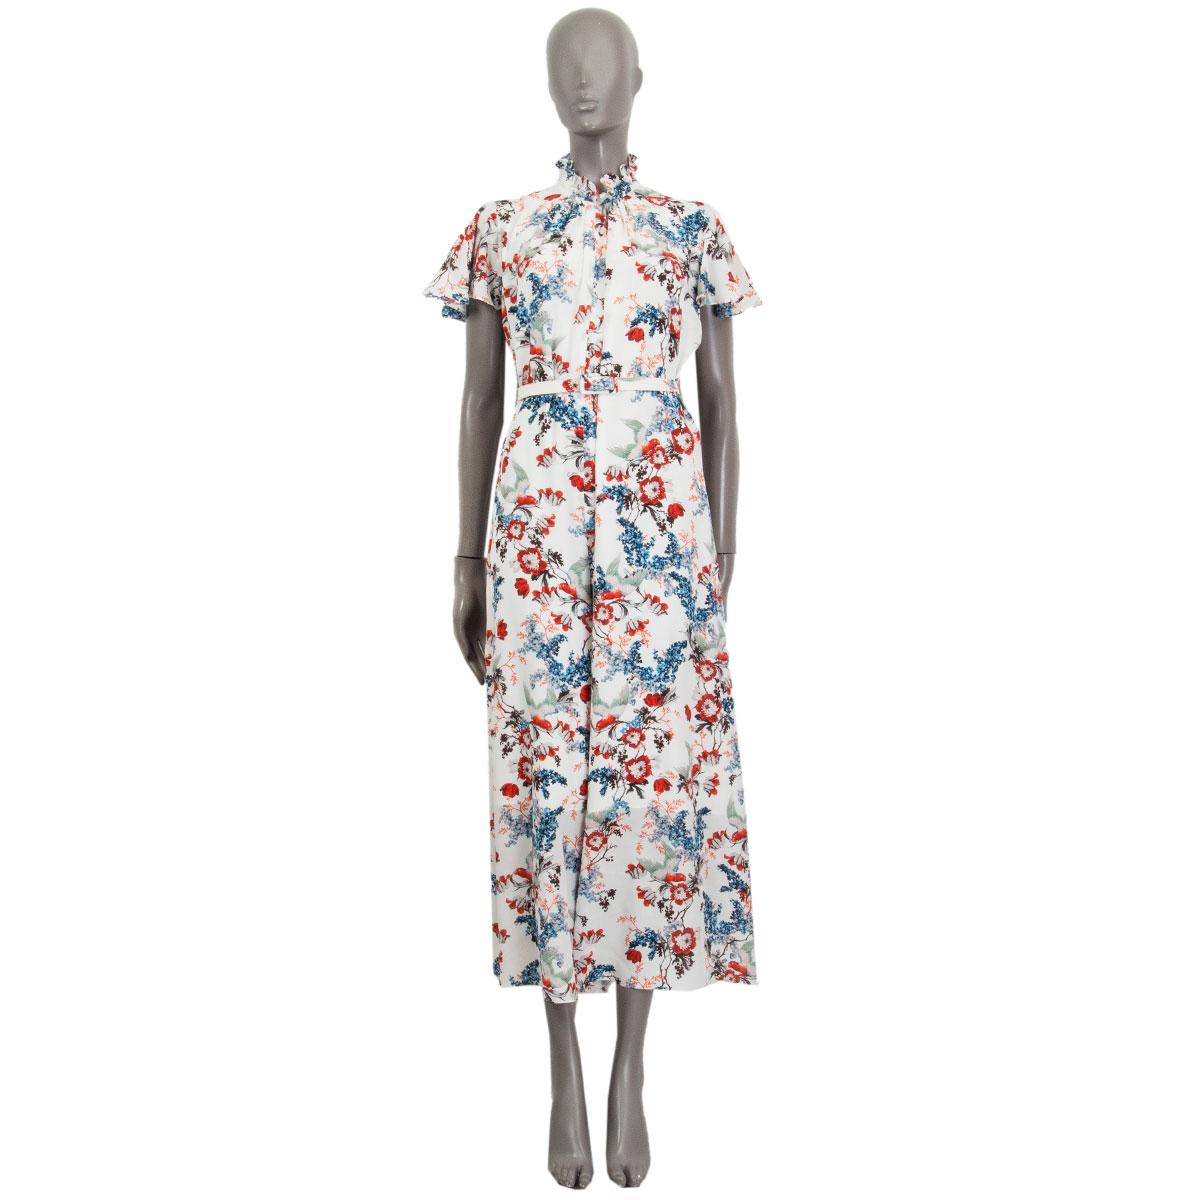 100% authentic Erdem Ellamay crepe de Chine jumpsuit in white, red, brown, blue and green silk (100%) with a ruffled neck, flared cap sleeves, wide legs and a waist belt with a buckle. Closes with a concealed zipper in the back. Lined in white silk